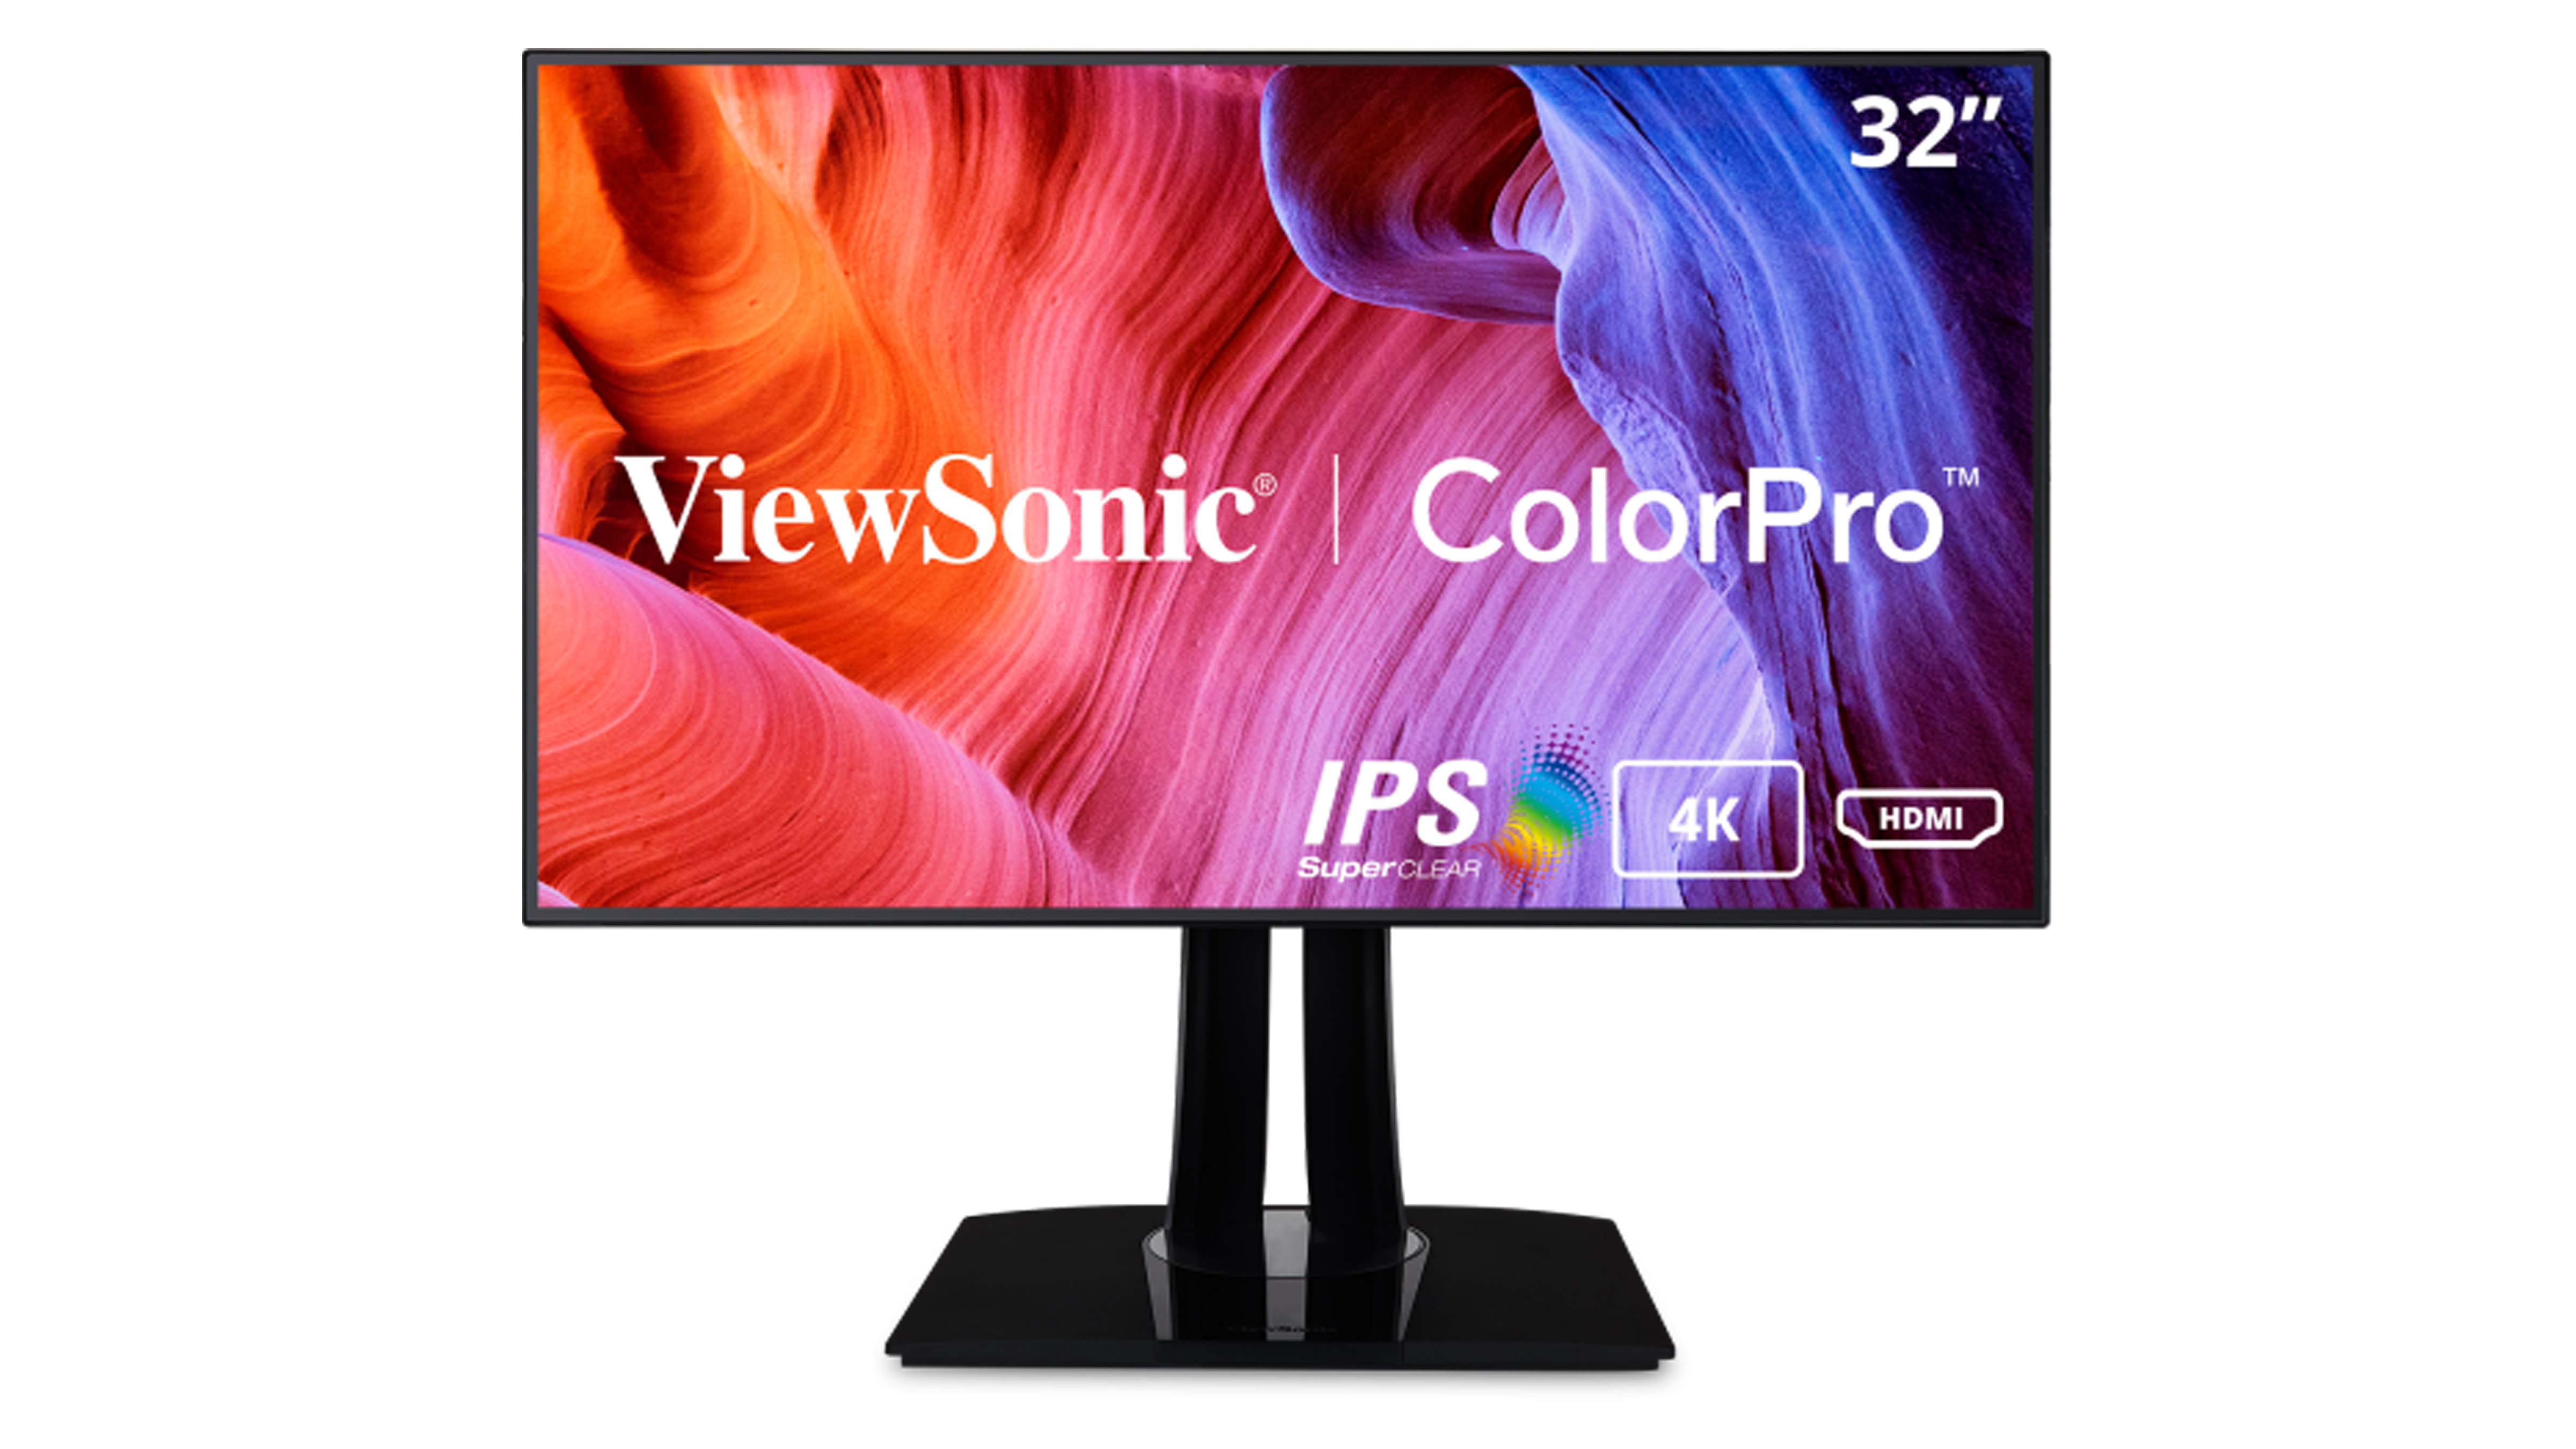 Product shot of ViewSonic VP3268a-4K, one of the best monitors for video editing